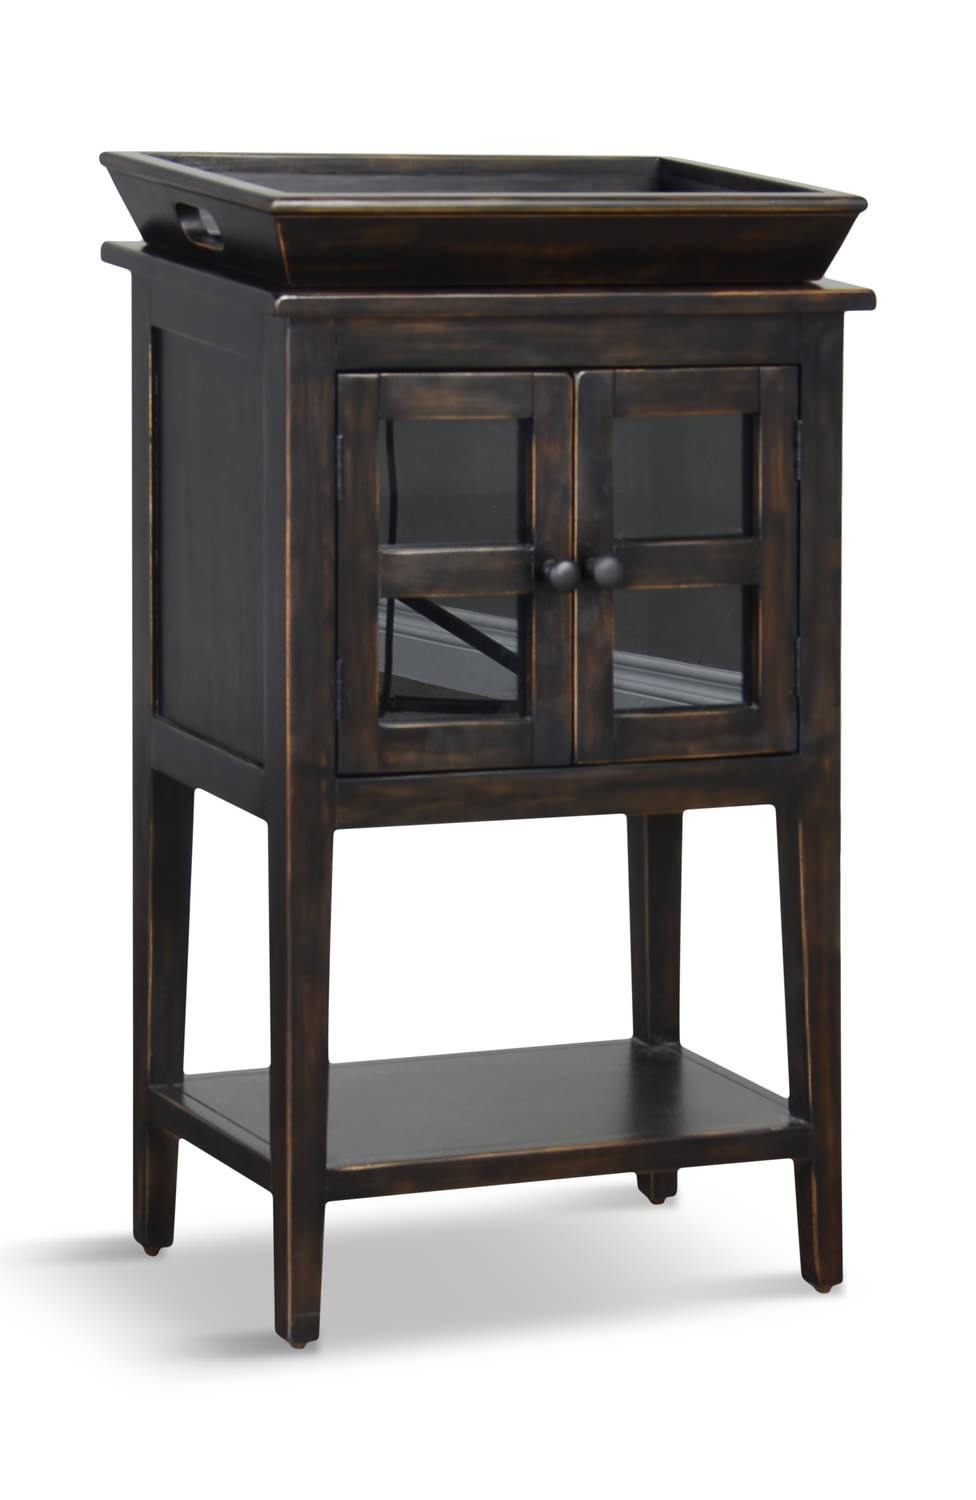 Mini bar with tray table hom furniture